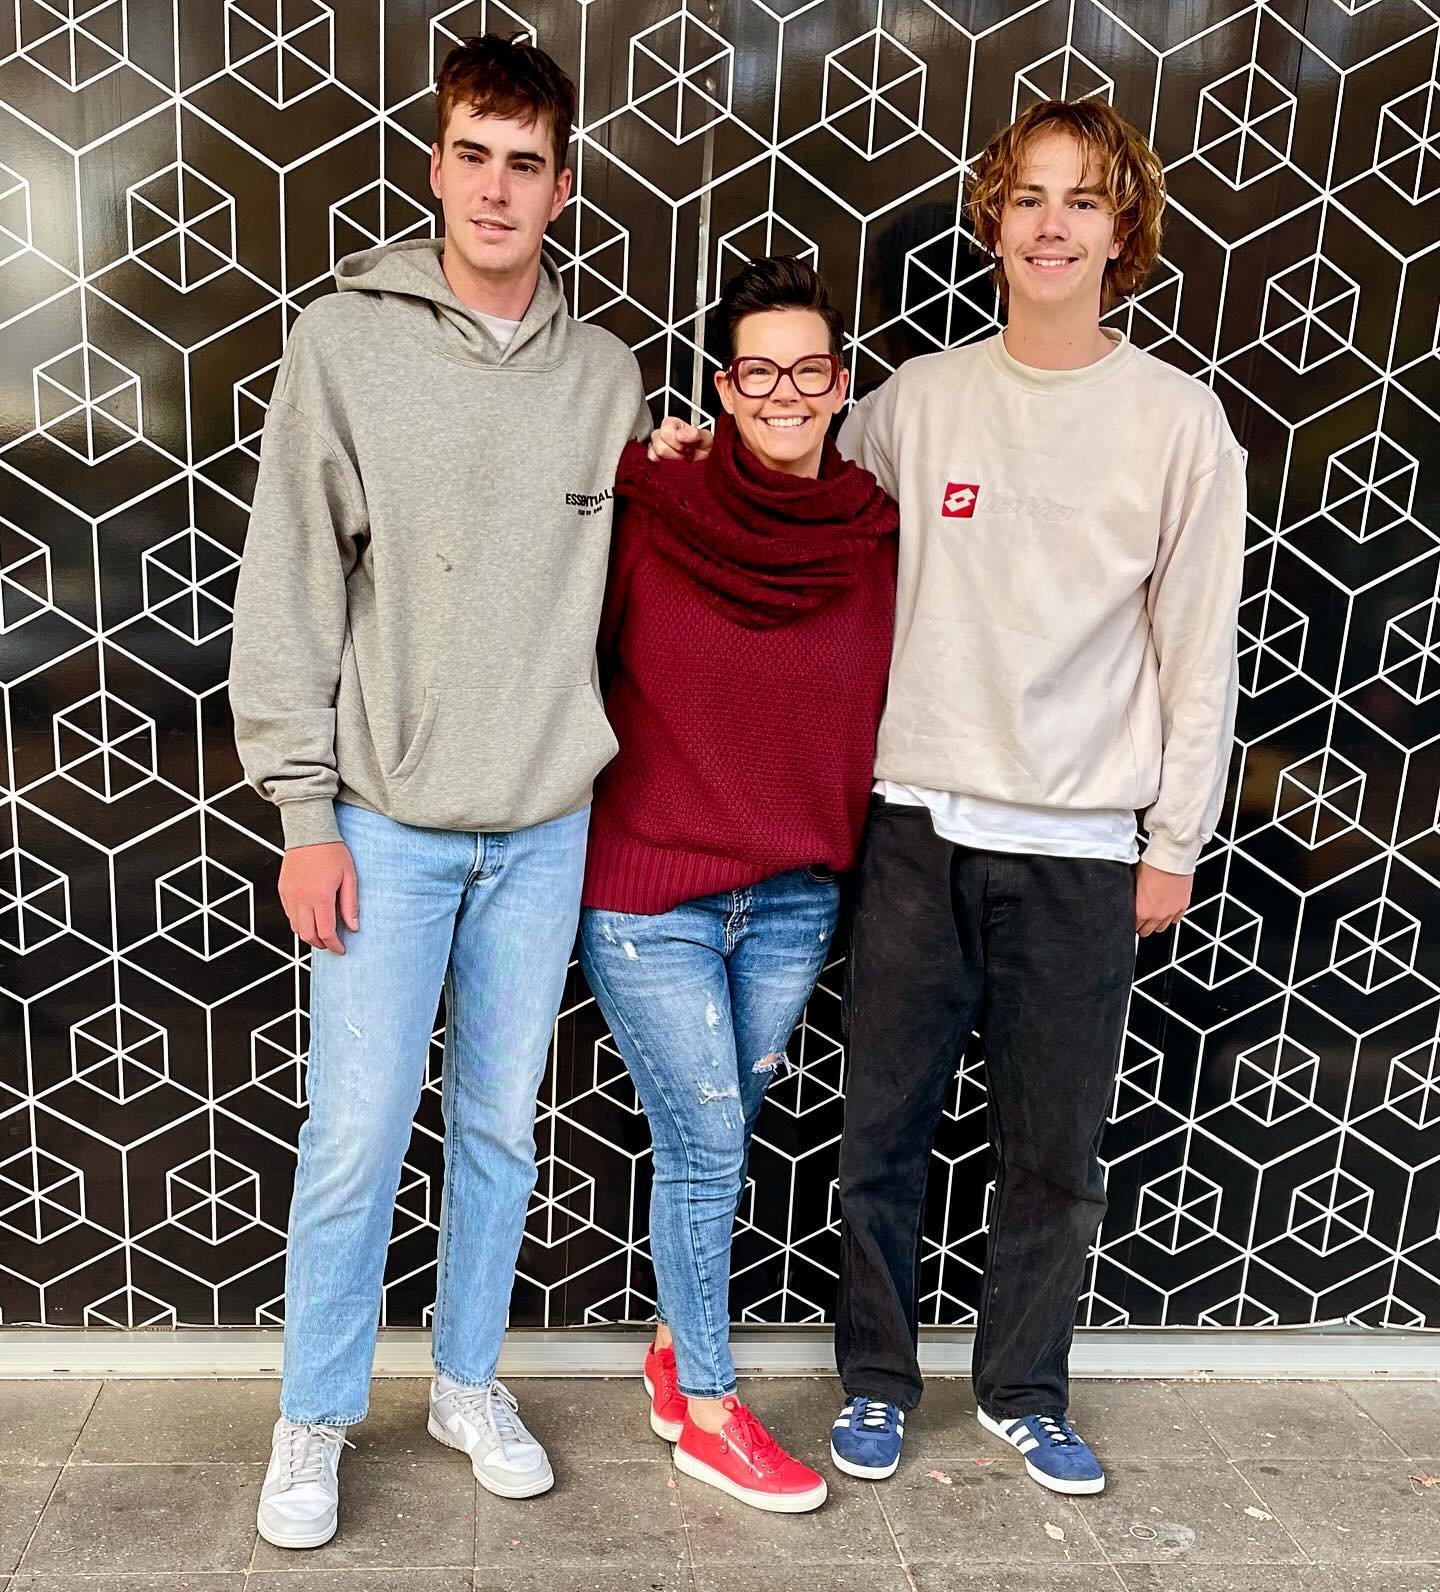 Hi there 👋🏻 I&rsquo;m Jo Speirs Romance Author, otherwise known as Shorty McShorty 😅

Had a lovely Mother&rsquo;s Day brekky @theupsideonprospect with my boys today and, yes, they are tall!

#MothersDay #golfmum